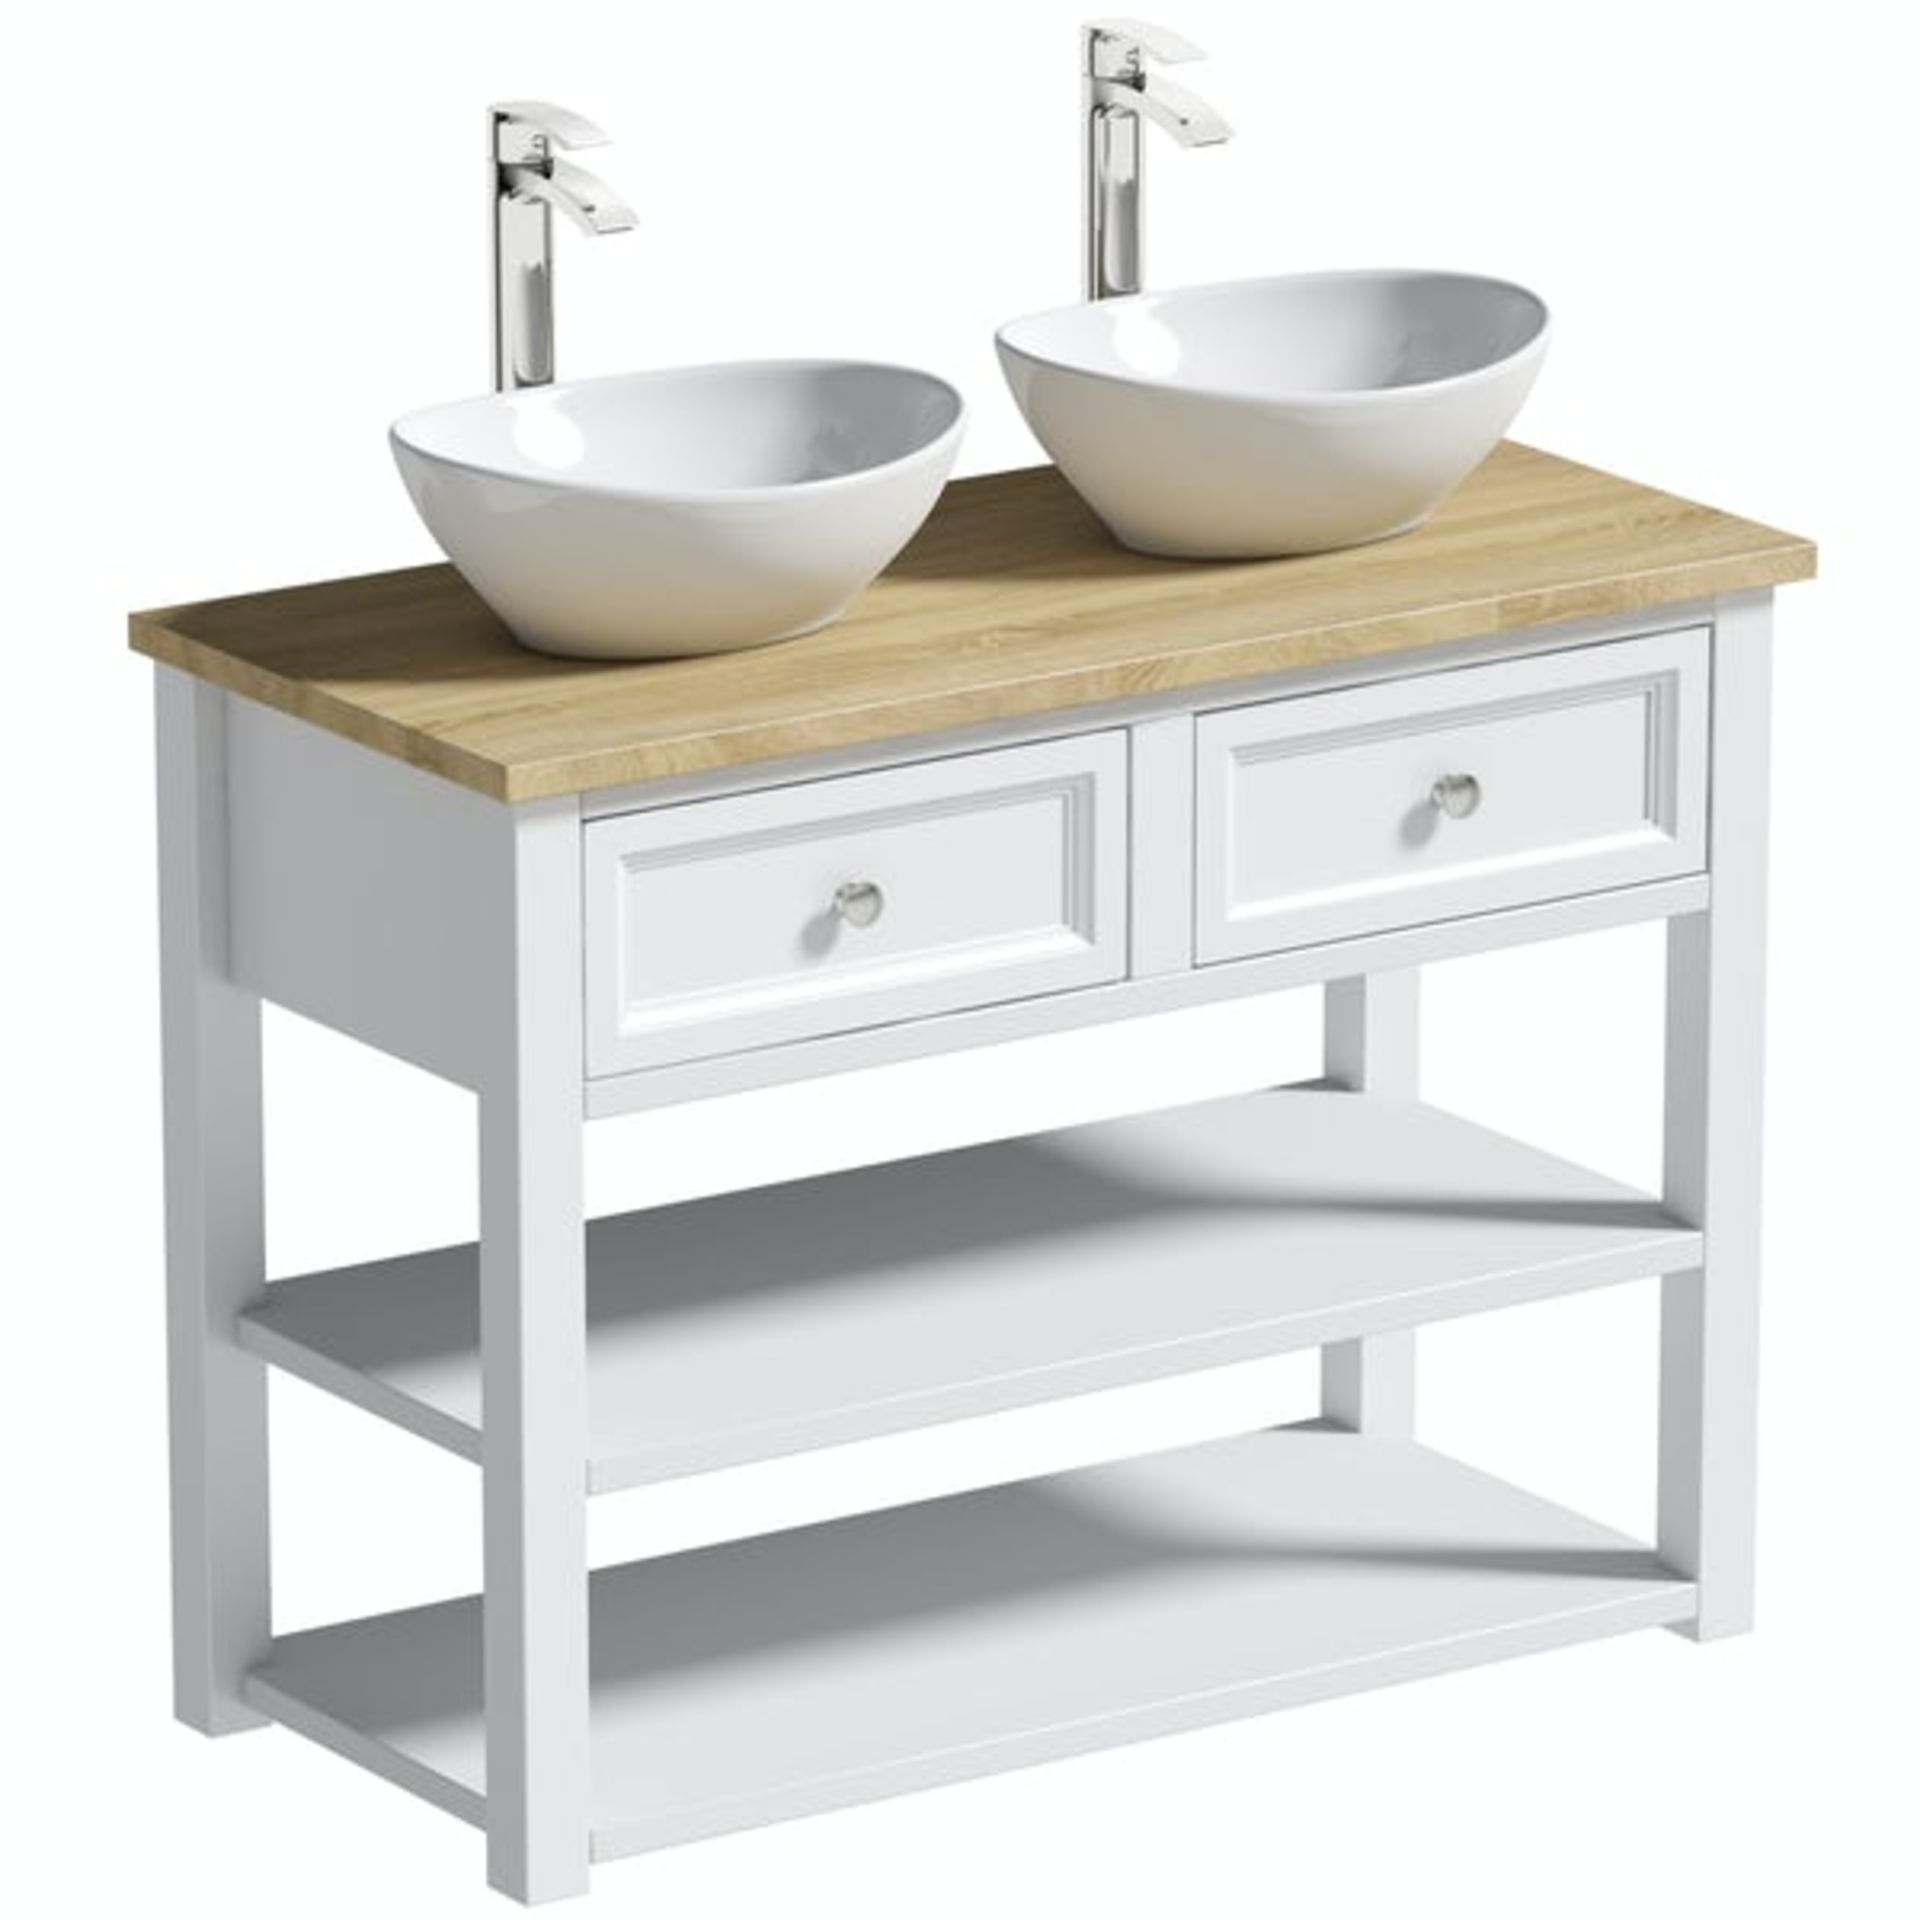 RRP £619. The Bath Co. Marlow 1040mm double washstand with Oak Effect Worktop. 470mm wide. Does Not